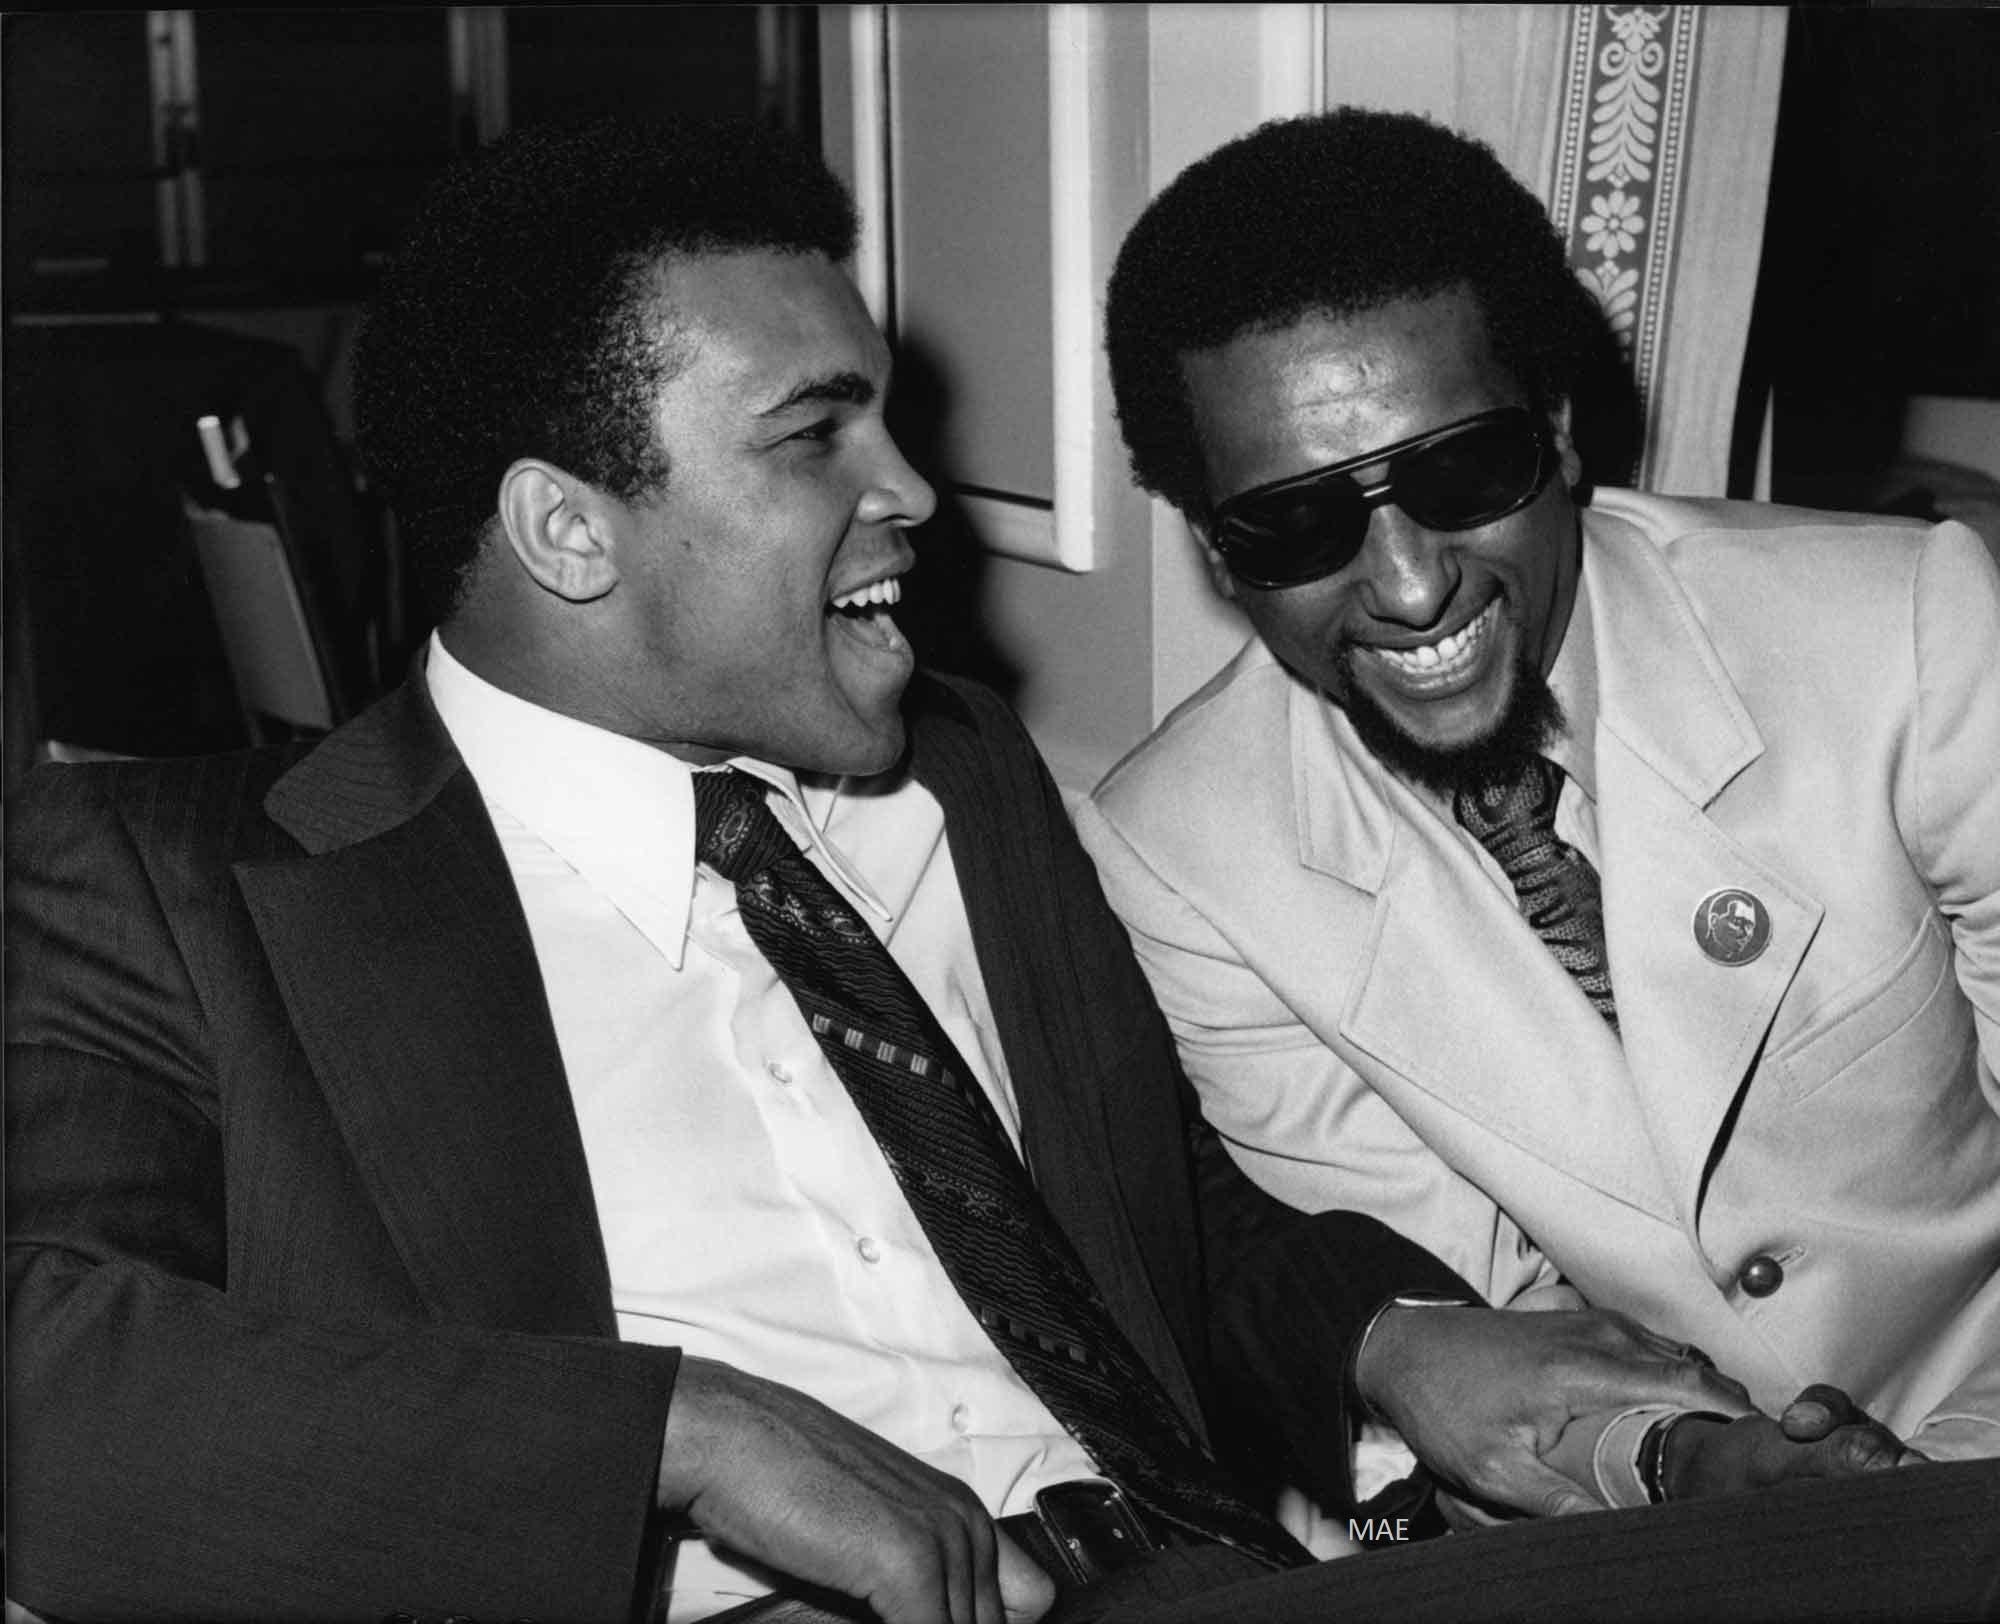 Guy Crowder Portrait Print - Icons & People - Muhammad Ali, Stokely Carmichael, Los Angeles, 1973 Print Later